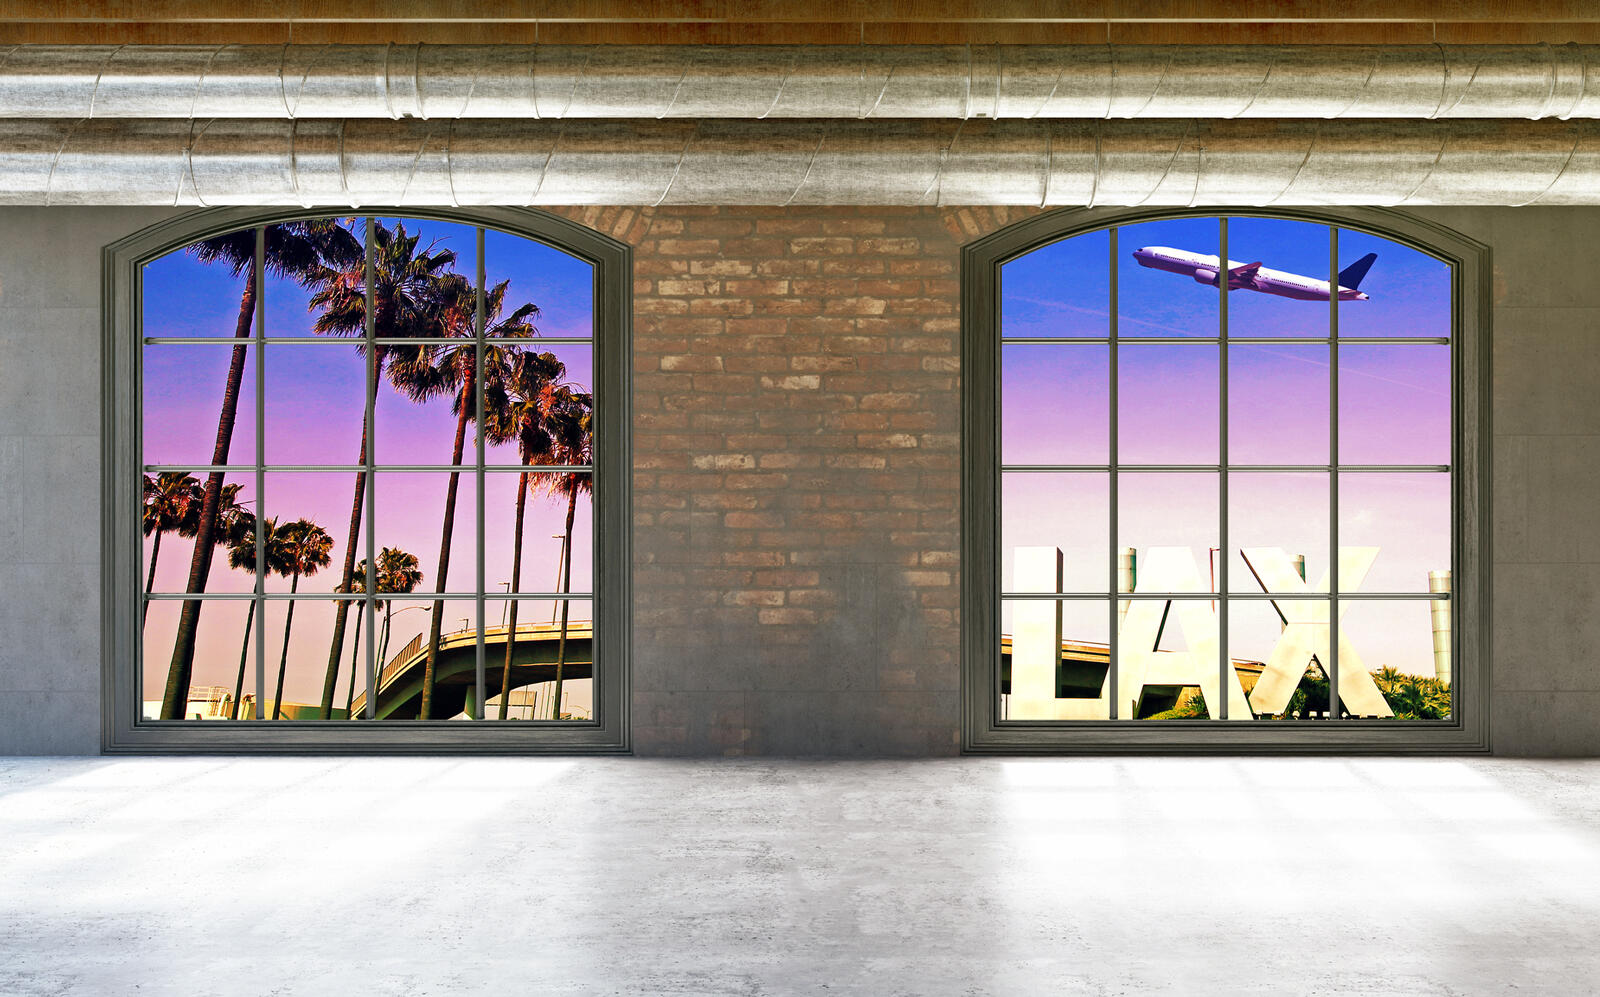 LAX industrial rent prices are $11.73 per square foot. (iStock)